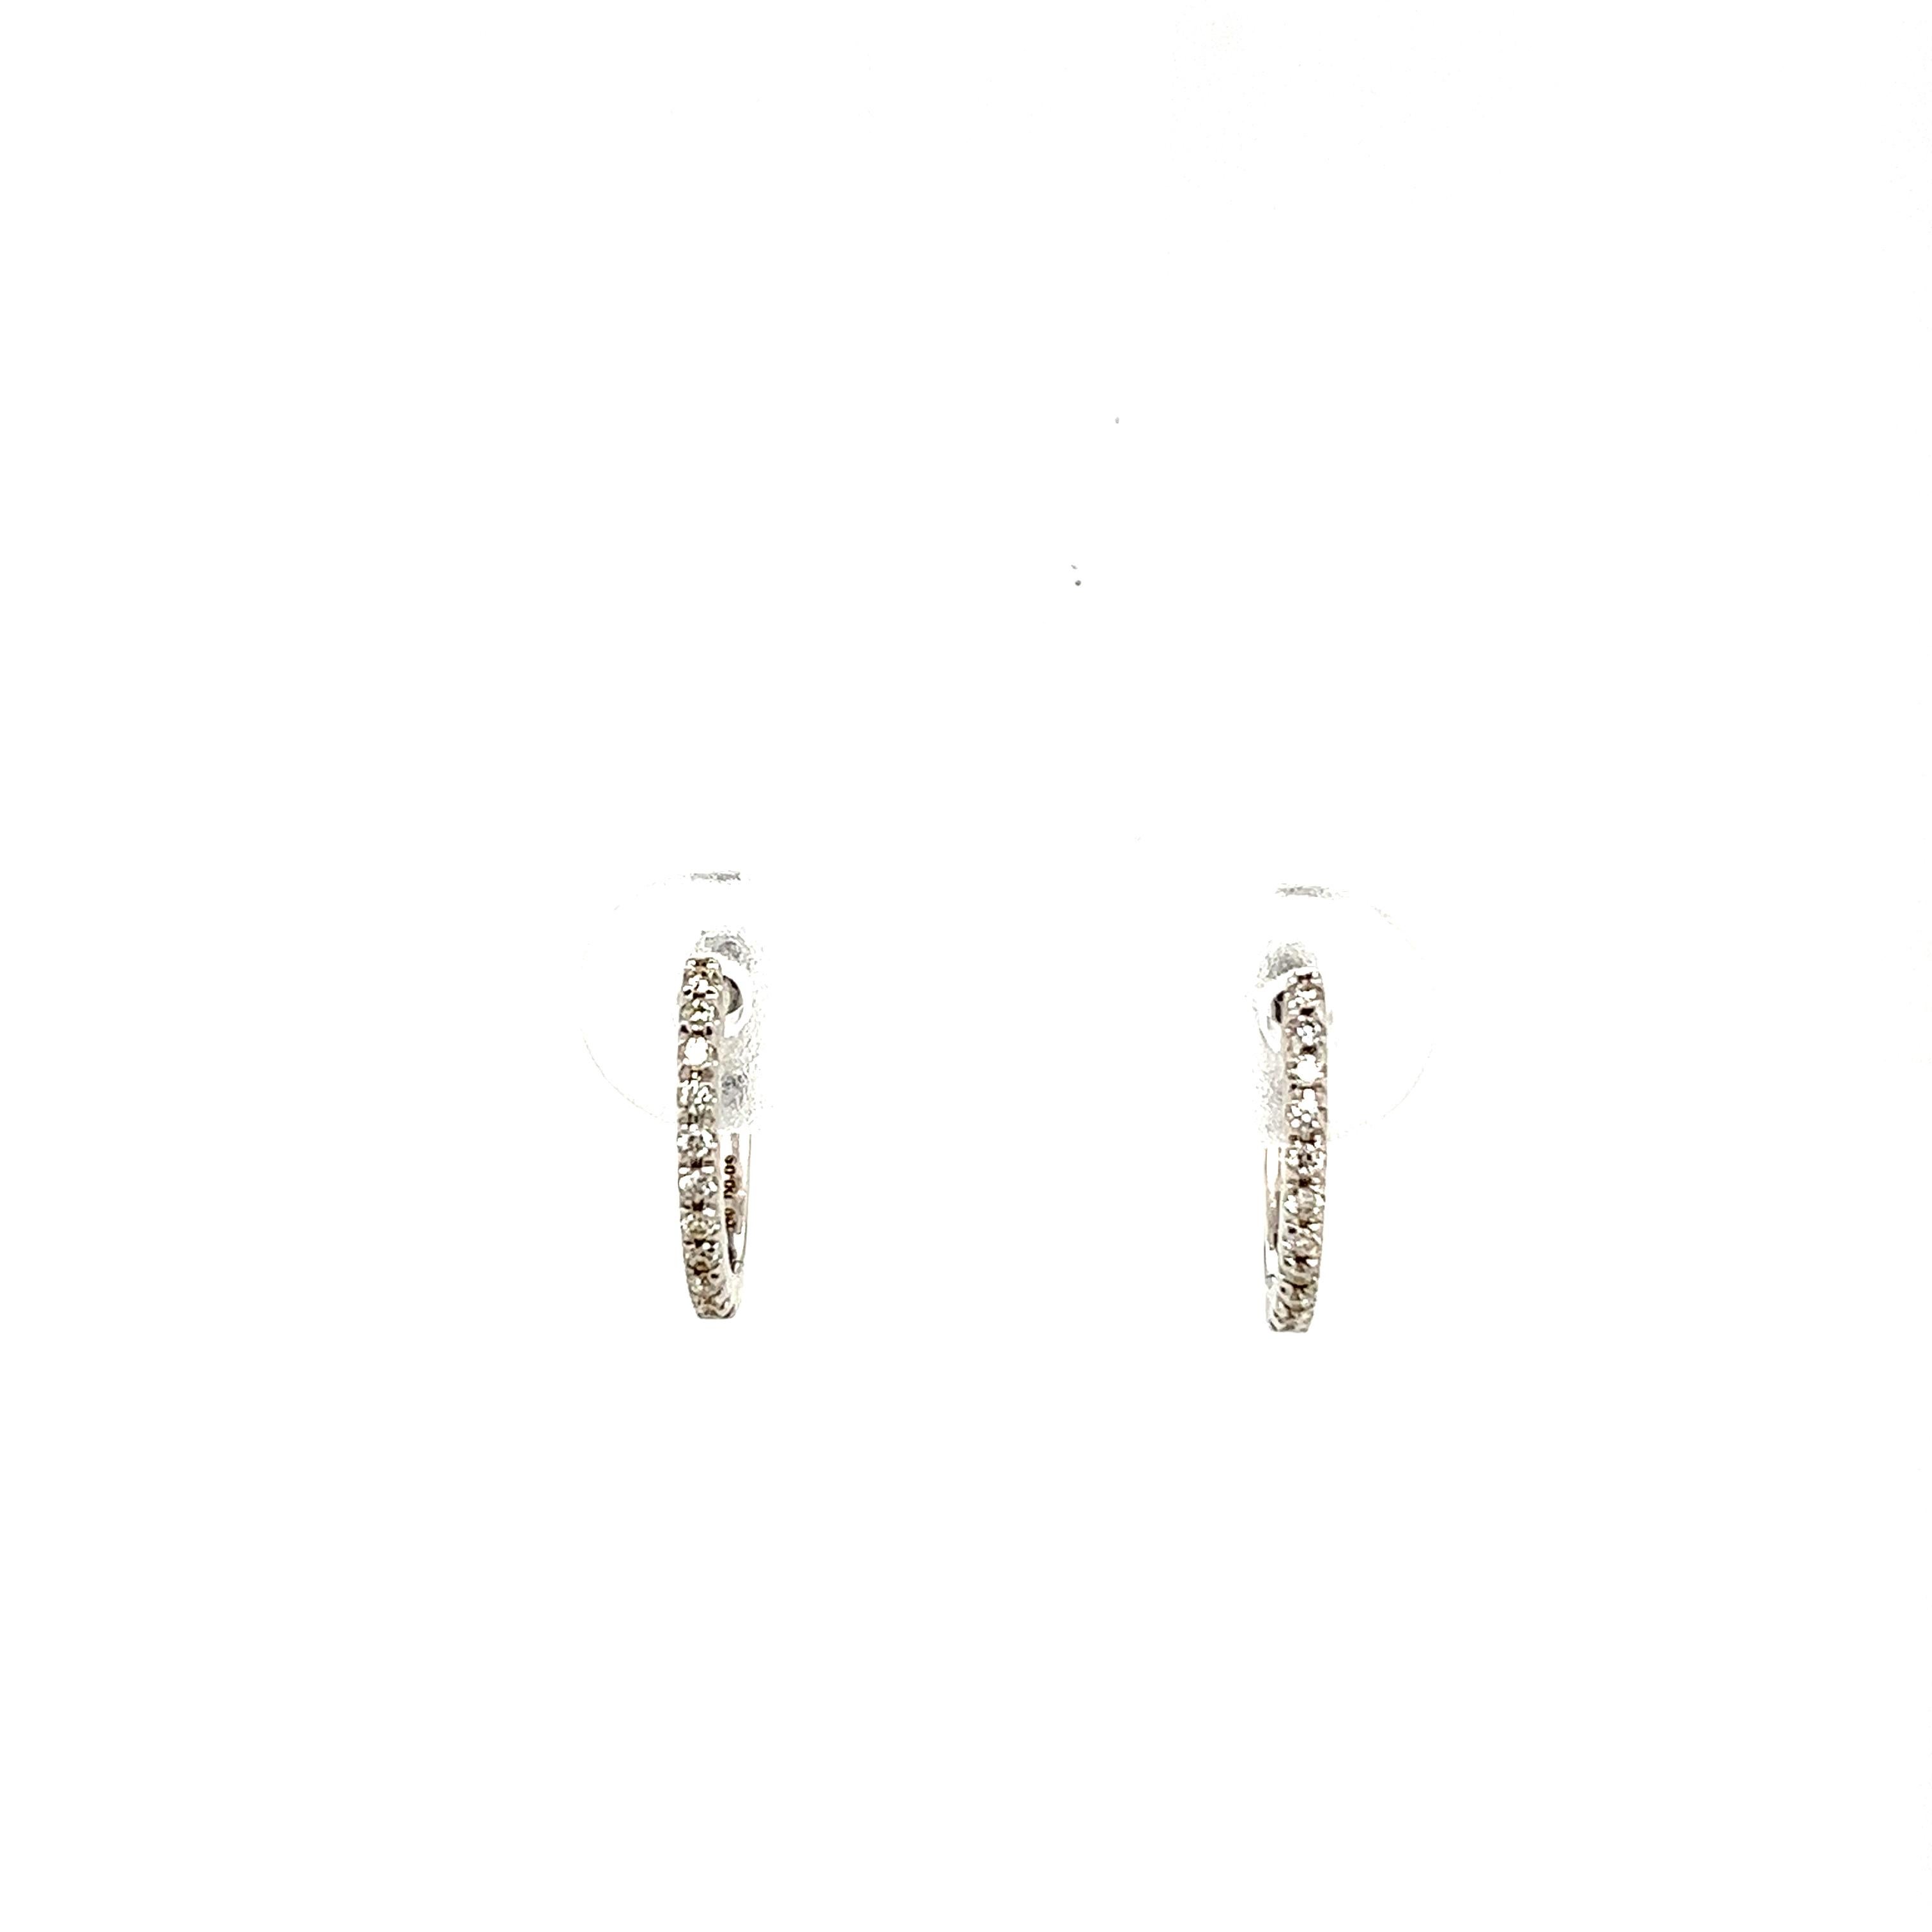 18ct White Gold Diamond Hoop Earrings, Set With 0.09ct Of Round Diamonds, 11mm For Sale 1